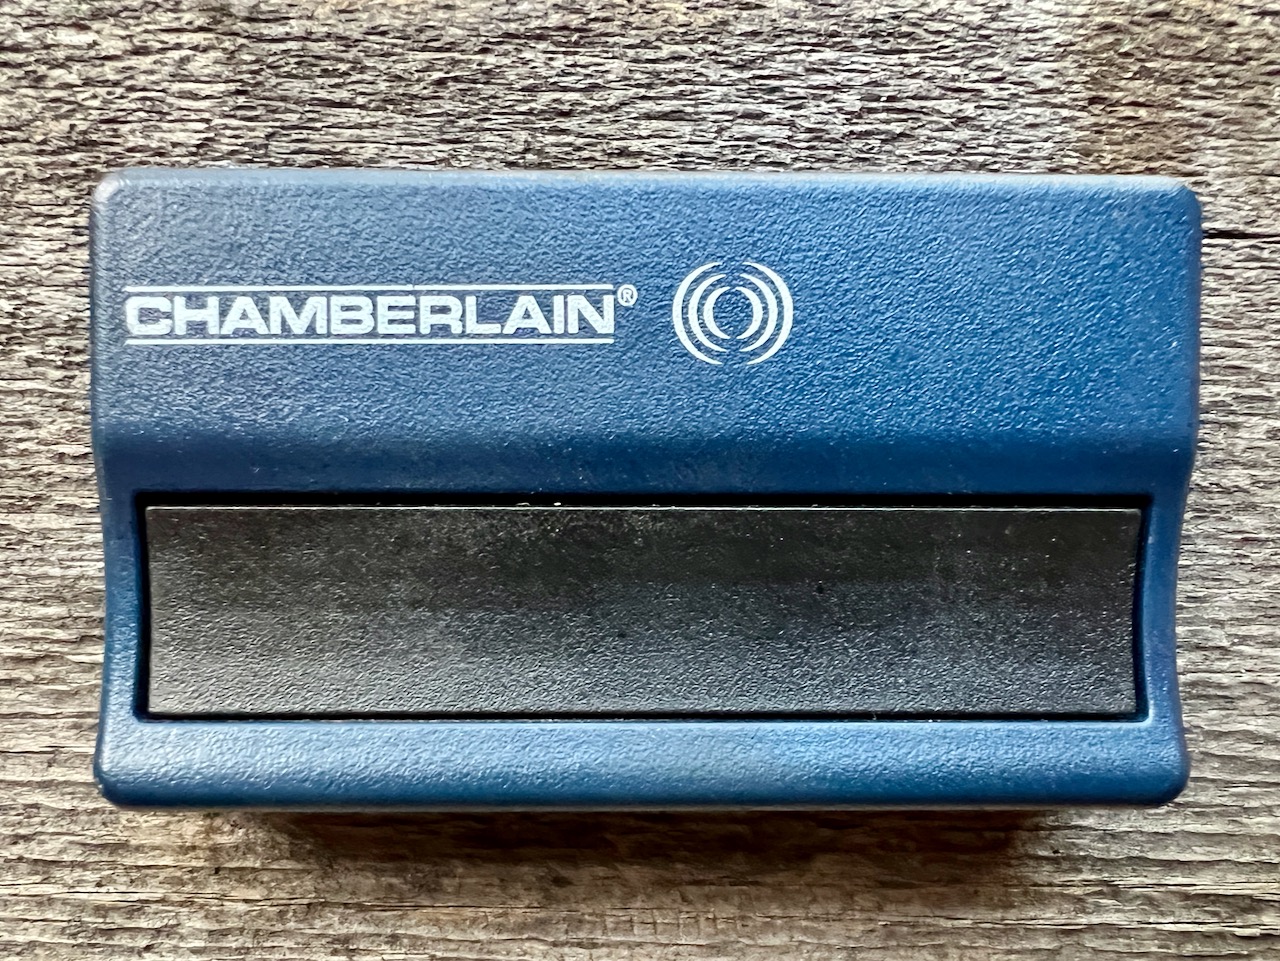 Chamberlain 950CD remote which is the same as the LiftMaster 371LM remote. Used for openers with a purple learn button.